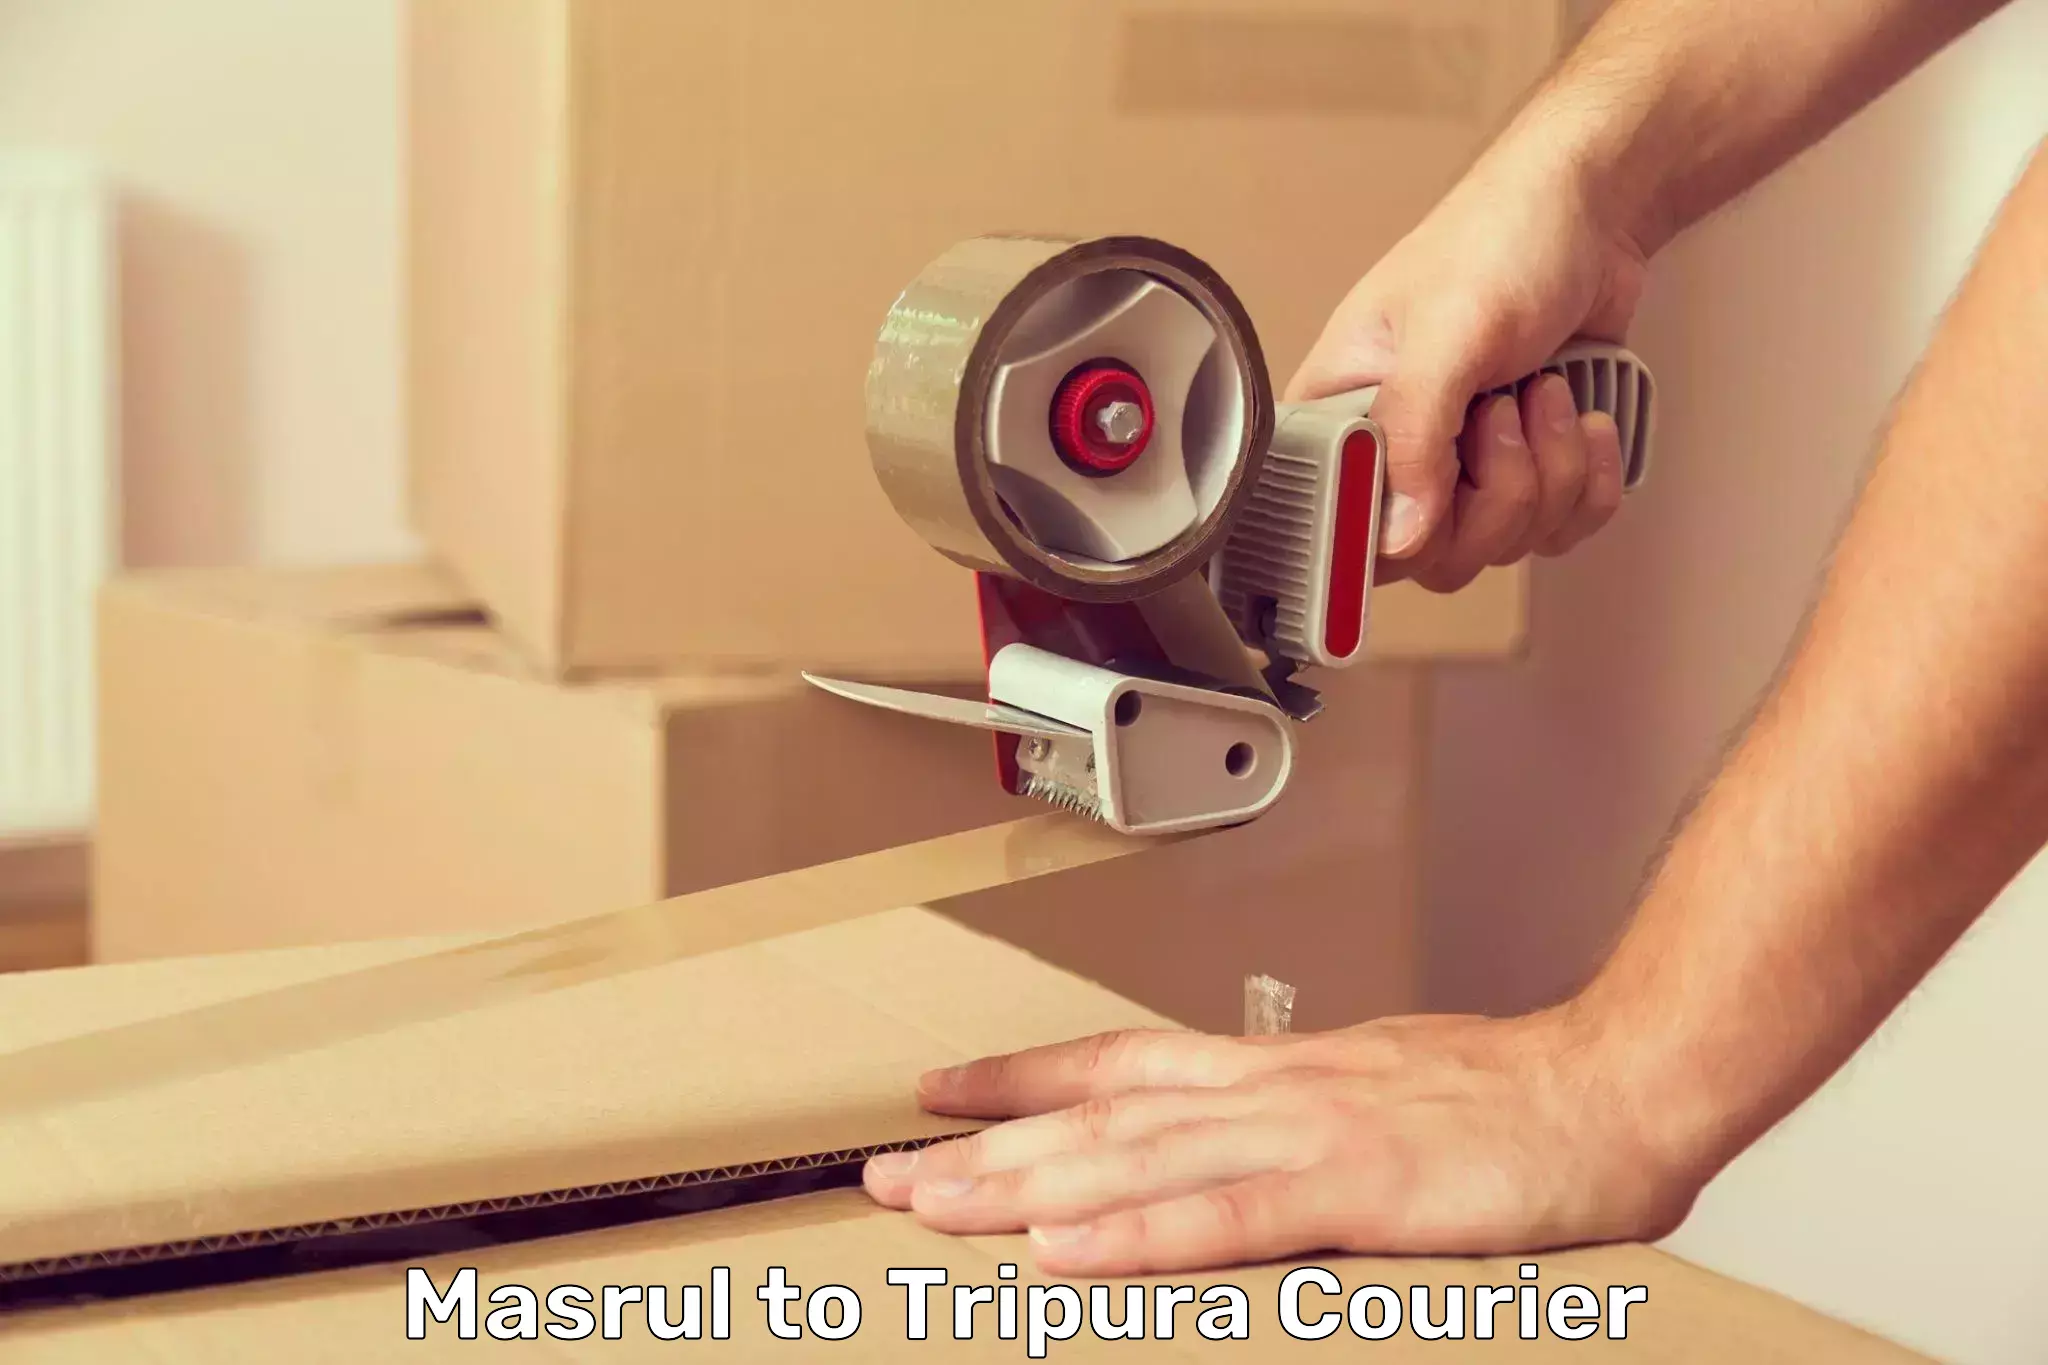 Cash on delivery service Masrul to Tripura